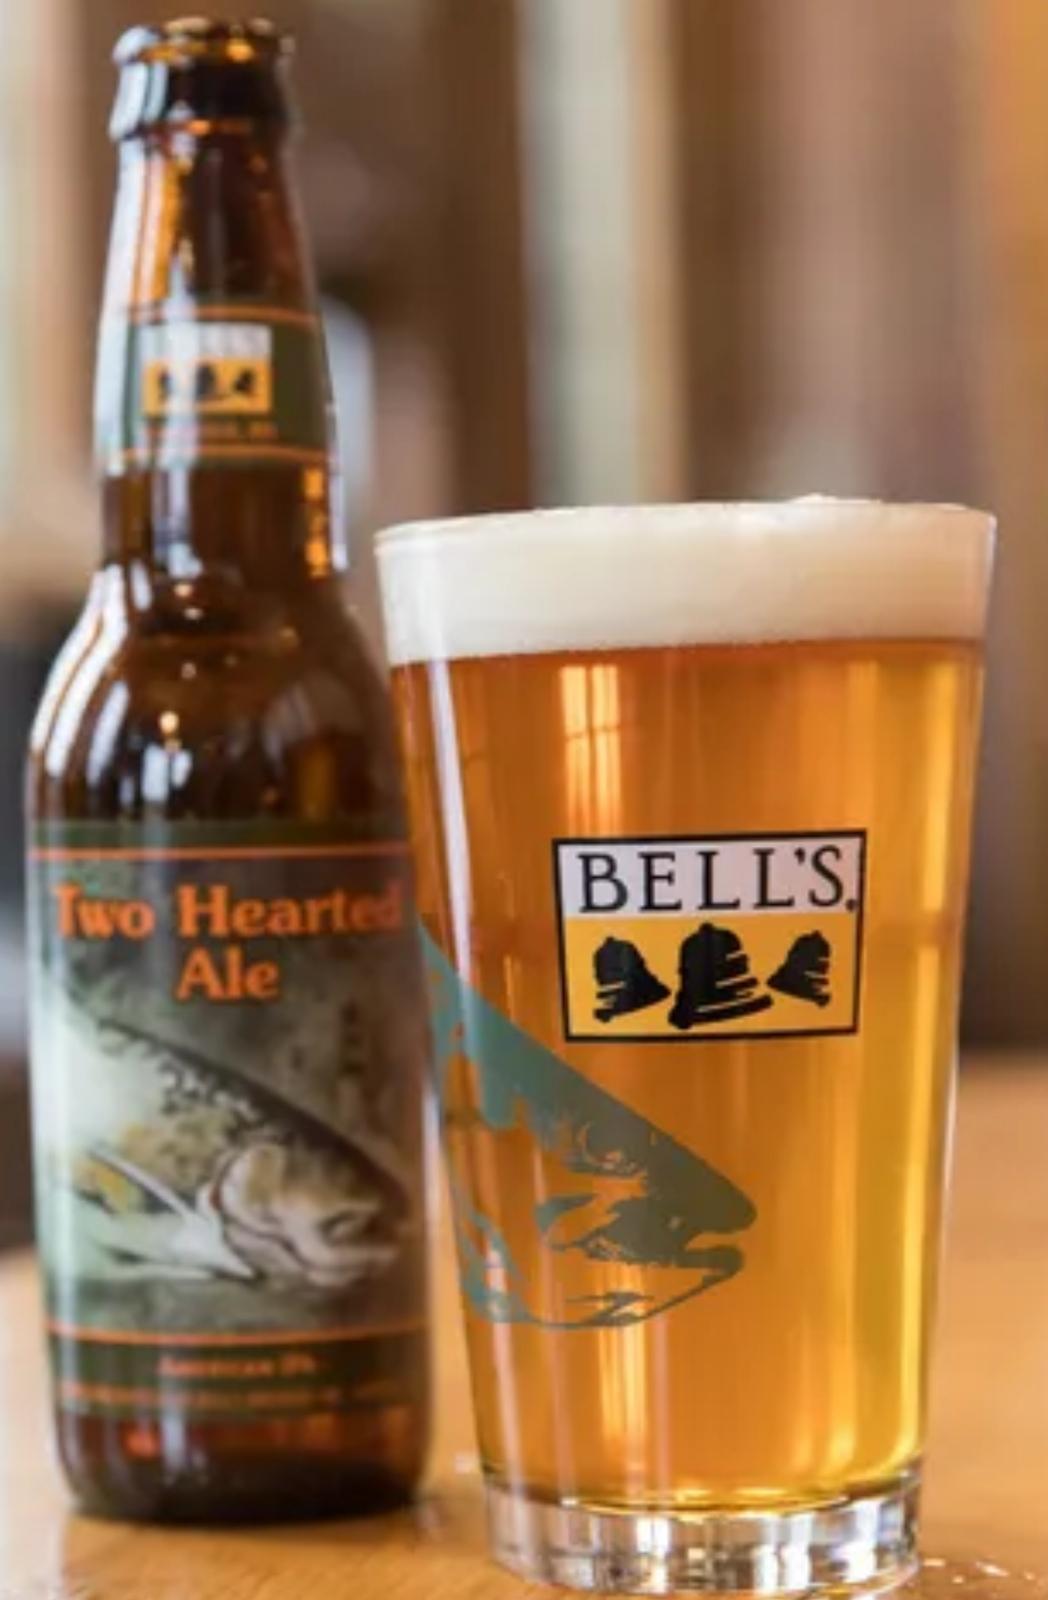 Two Hearted Ale | BrewGene